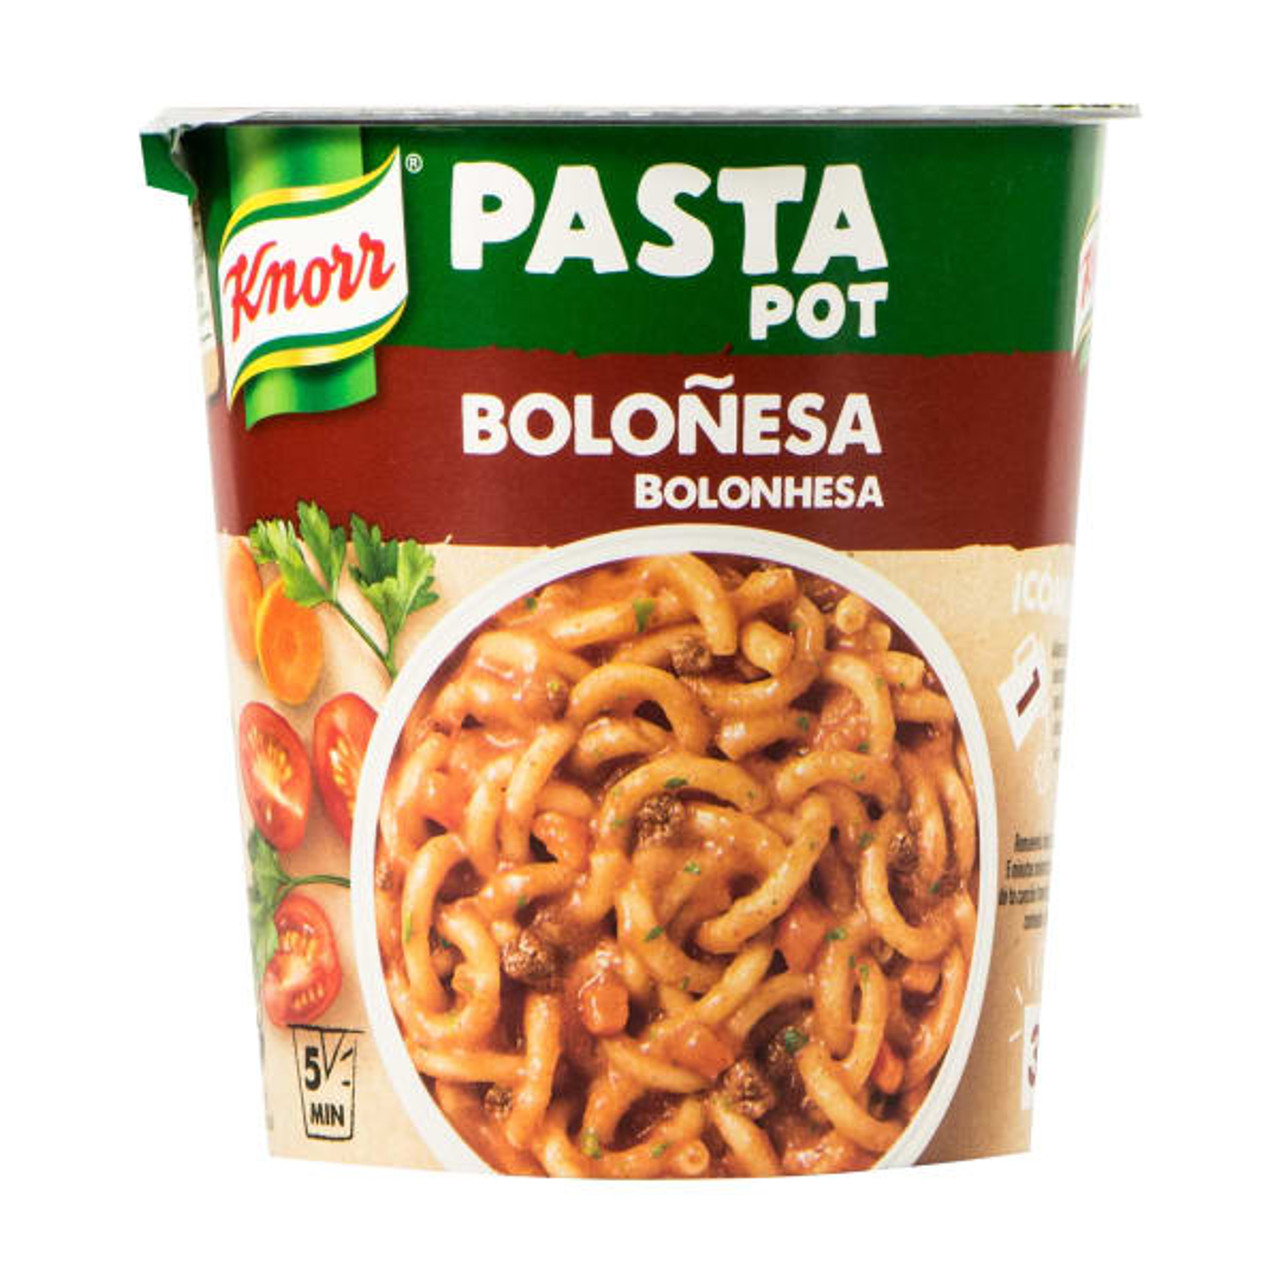 Knorr Pasta Pot Bolognese - Pasta anywhere ready In 5 minutes - Dona Maria  Gourmet